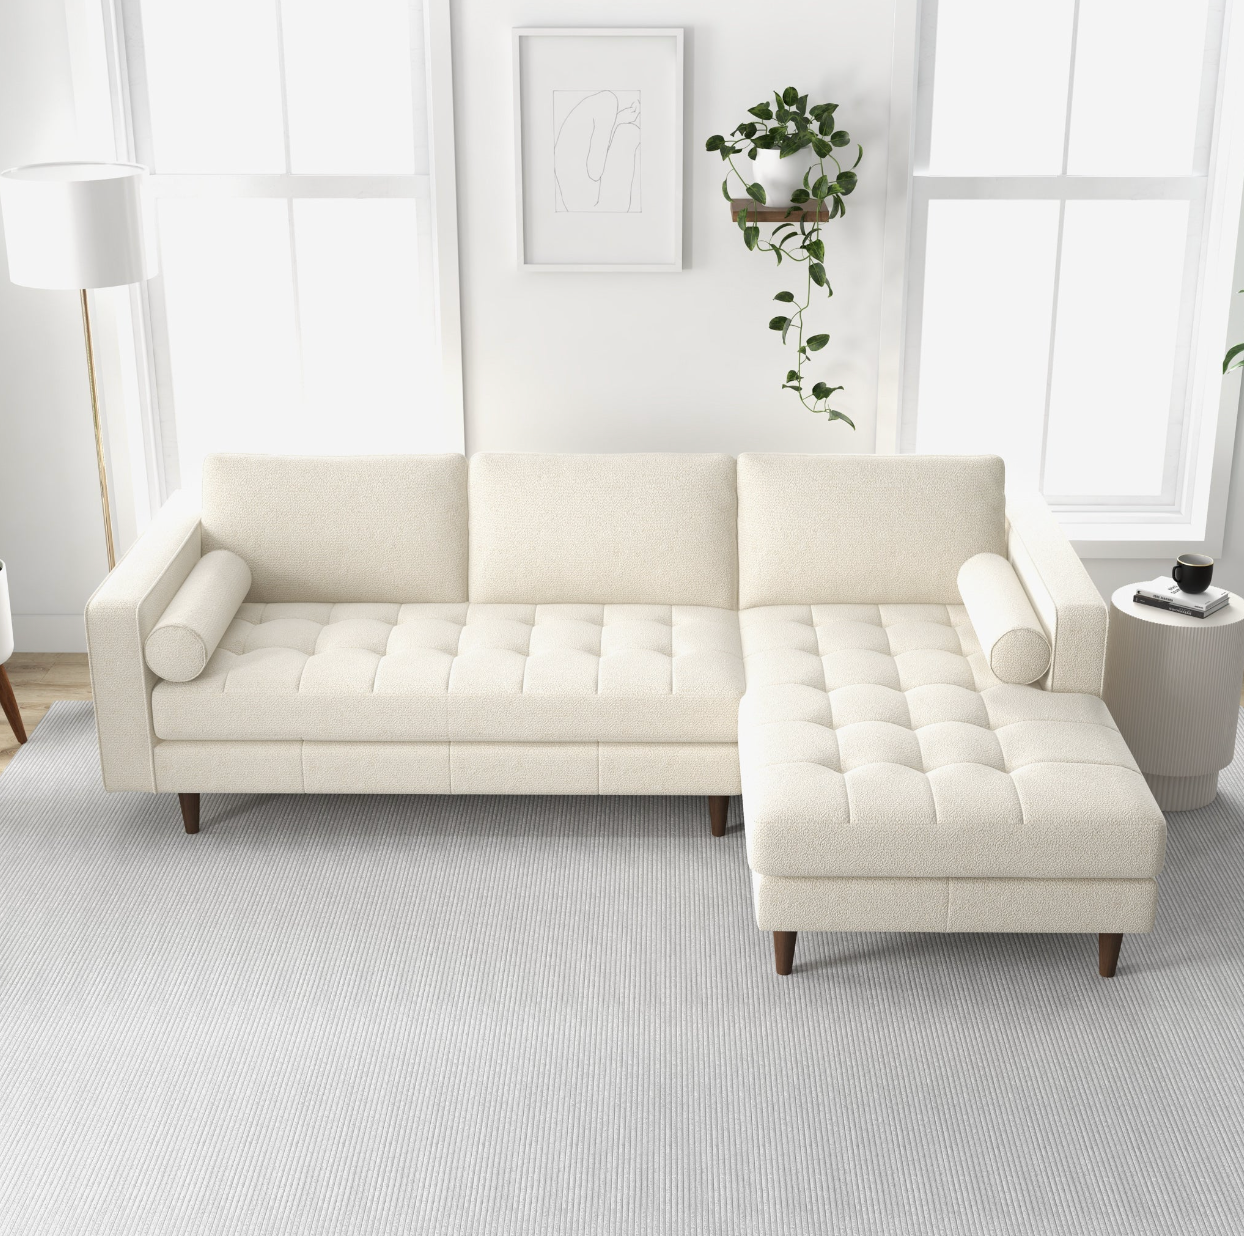 Anthony Tufted Cream Boucle Sectional Sofa - Right Facing Chaise